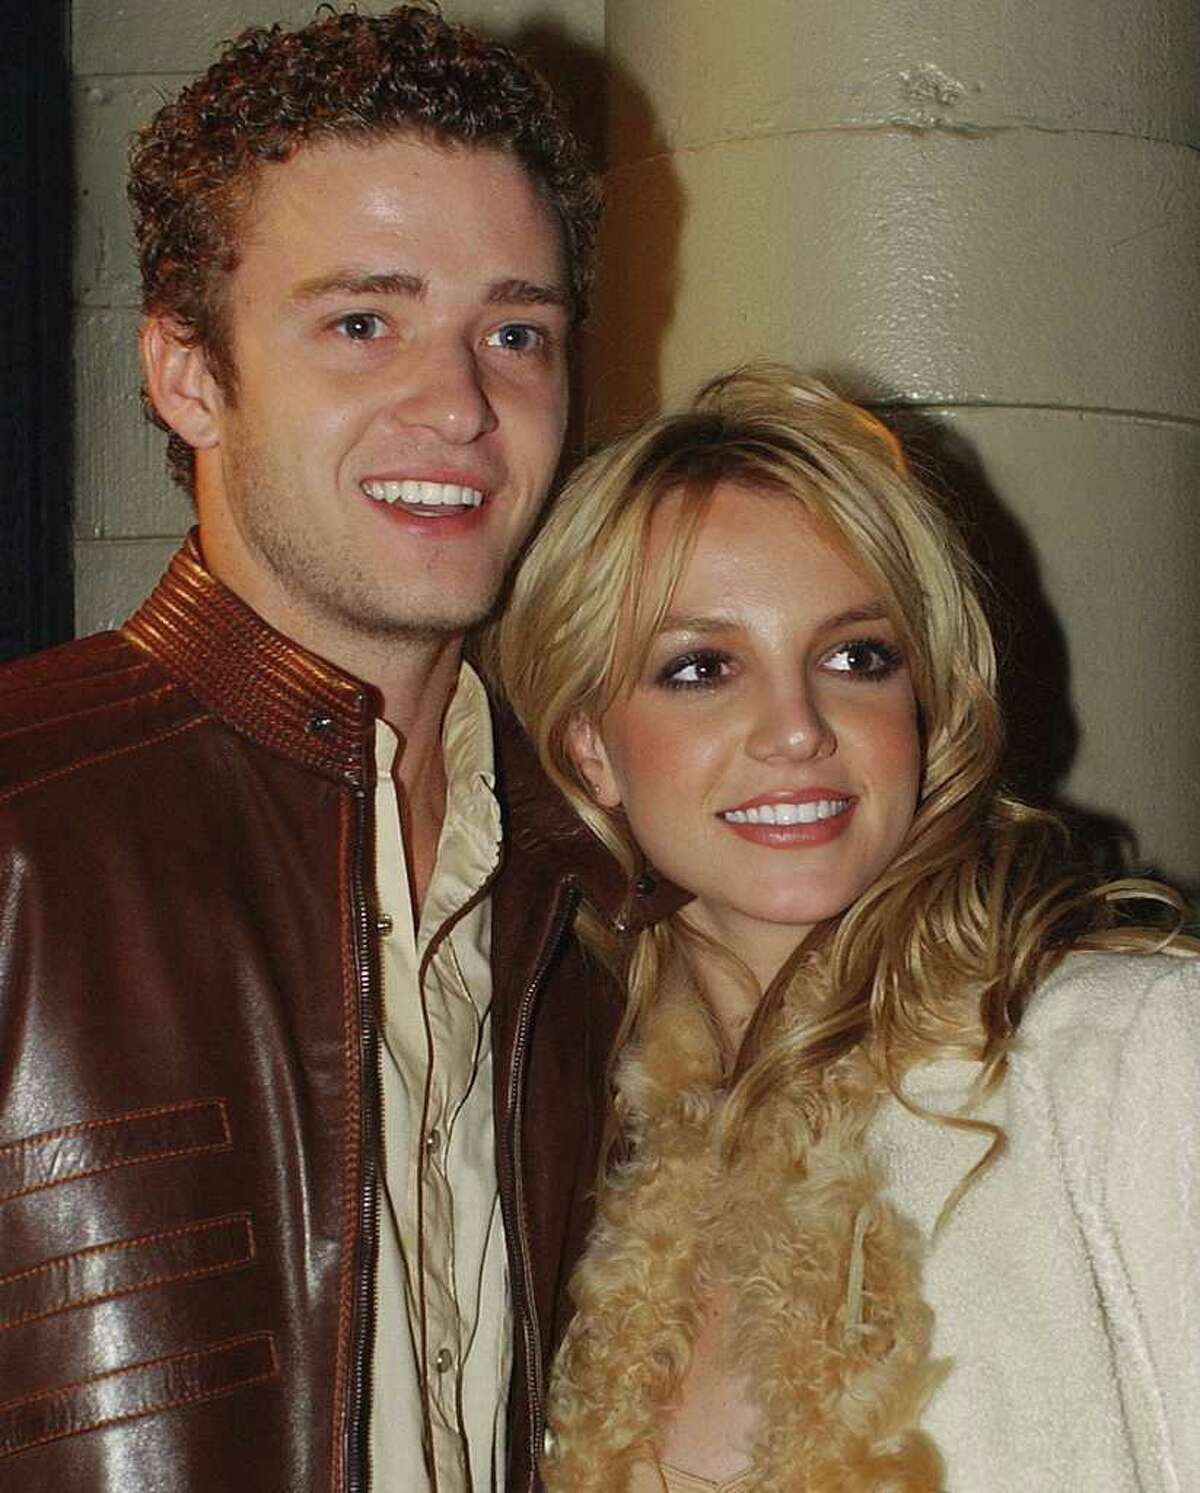 Justin Timberlake of 'NSYNC and Britney Spears were the "It" couple. The hearts of many girl and boys alike were systematically broken.